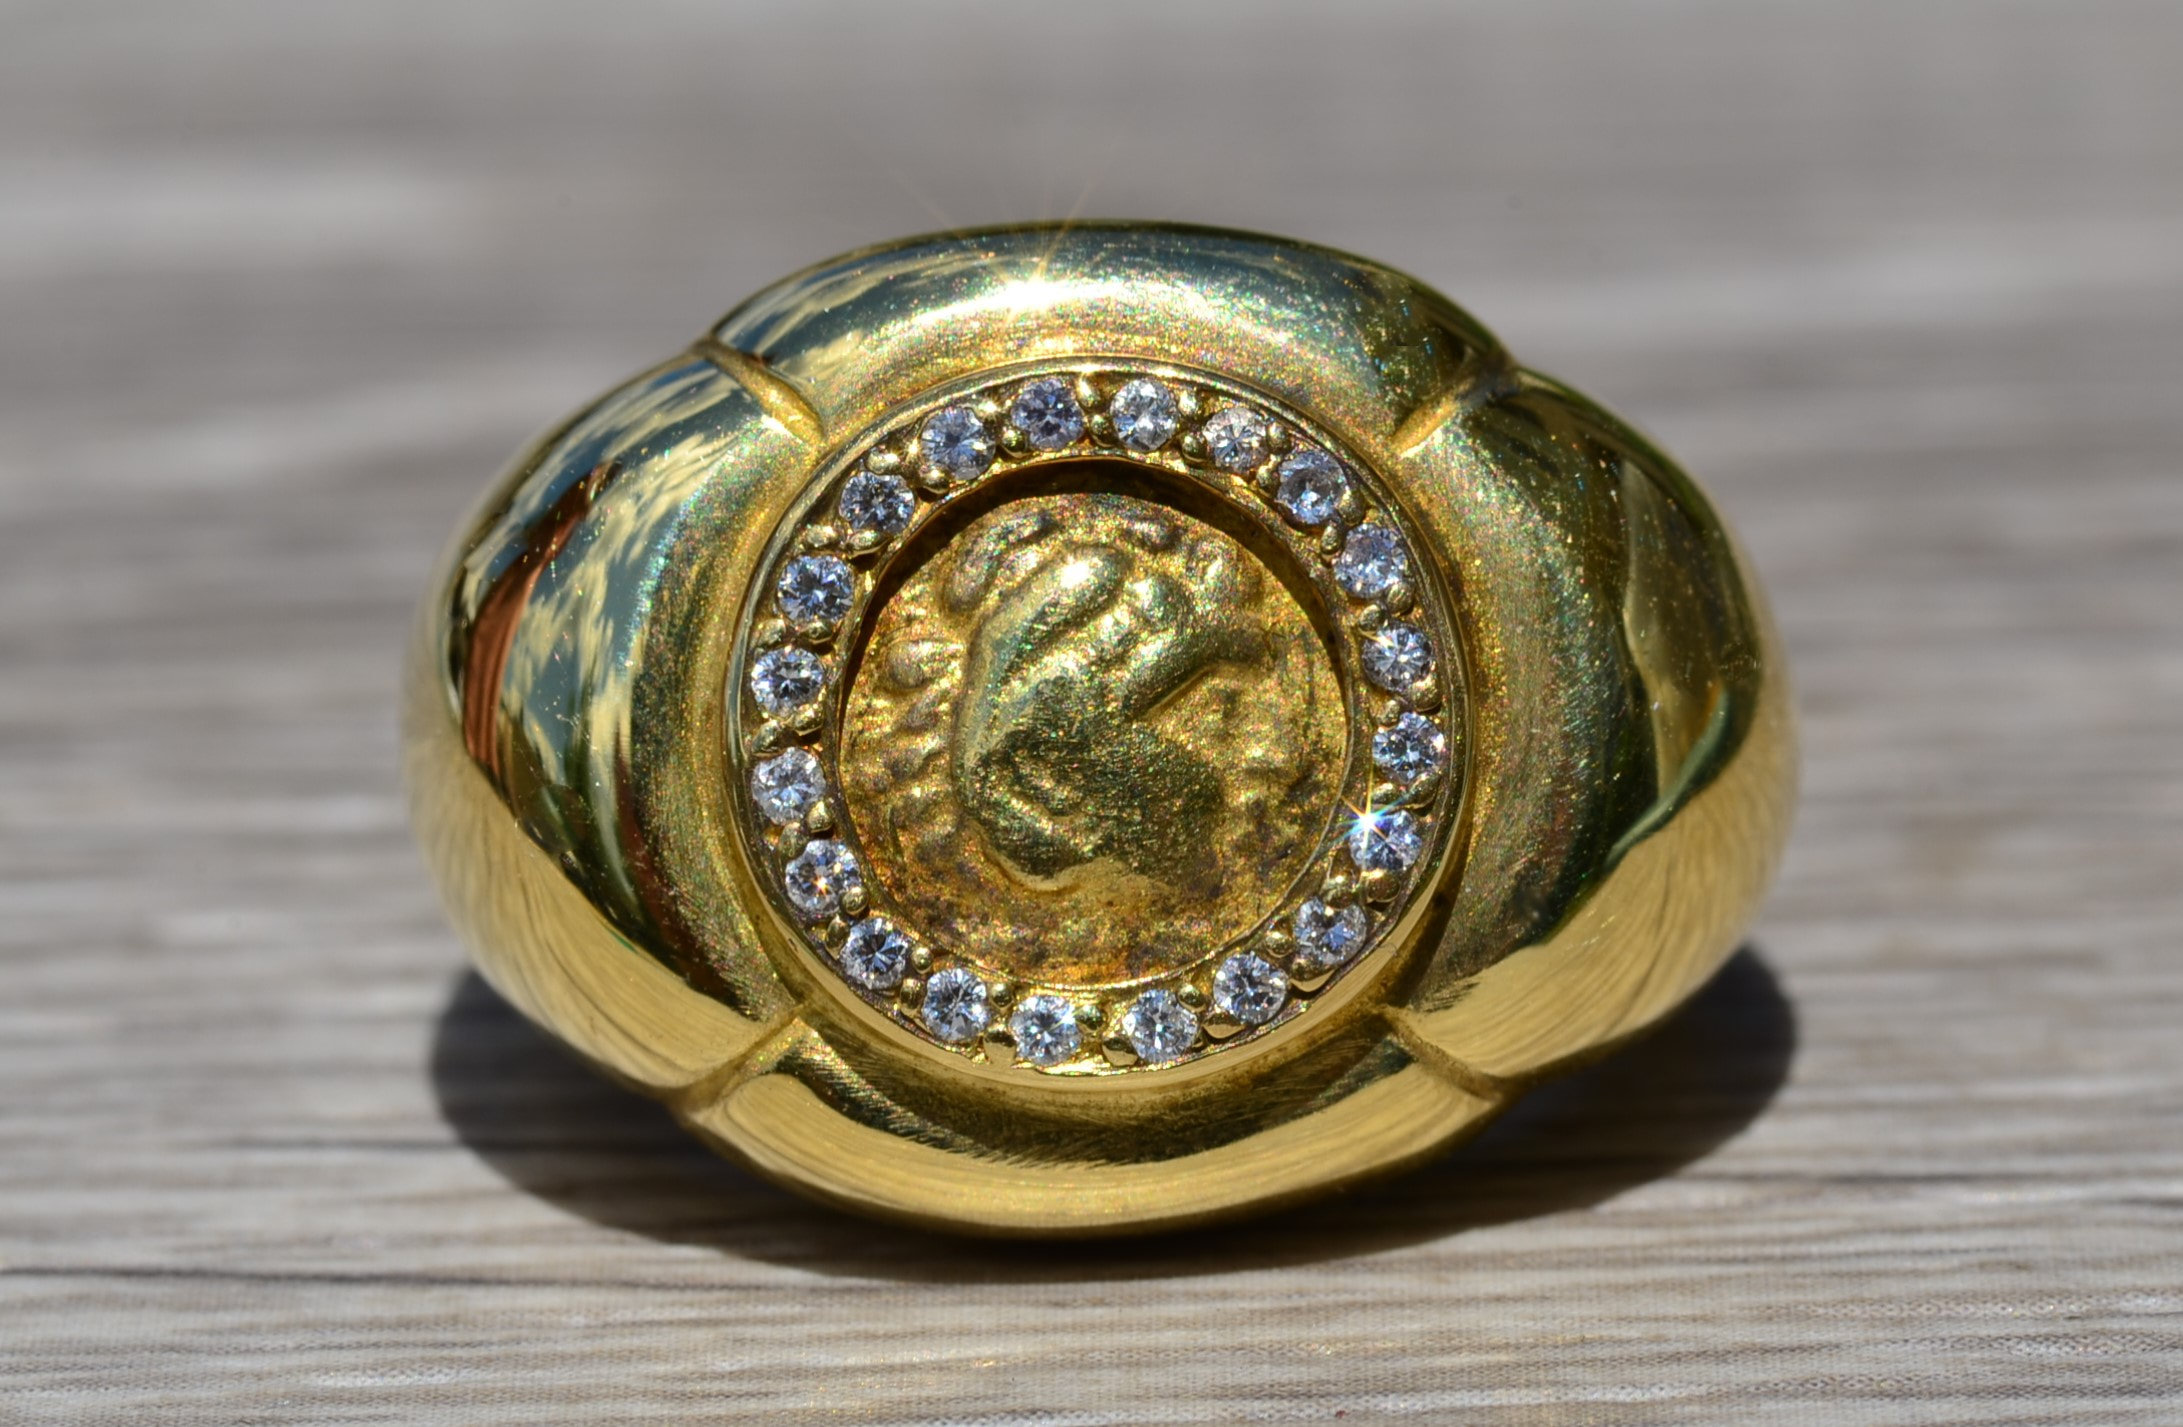 Athena - Handmade Coin Ring, in 18k gold Ring Size (US) 8 1/2 - (EU) 58